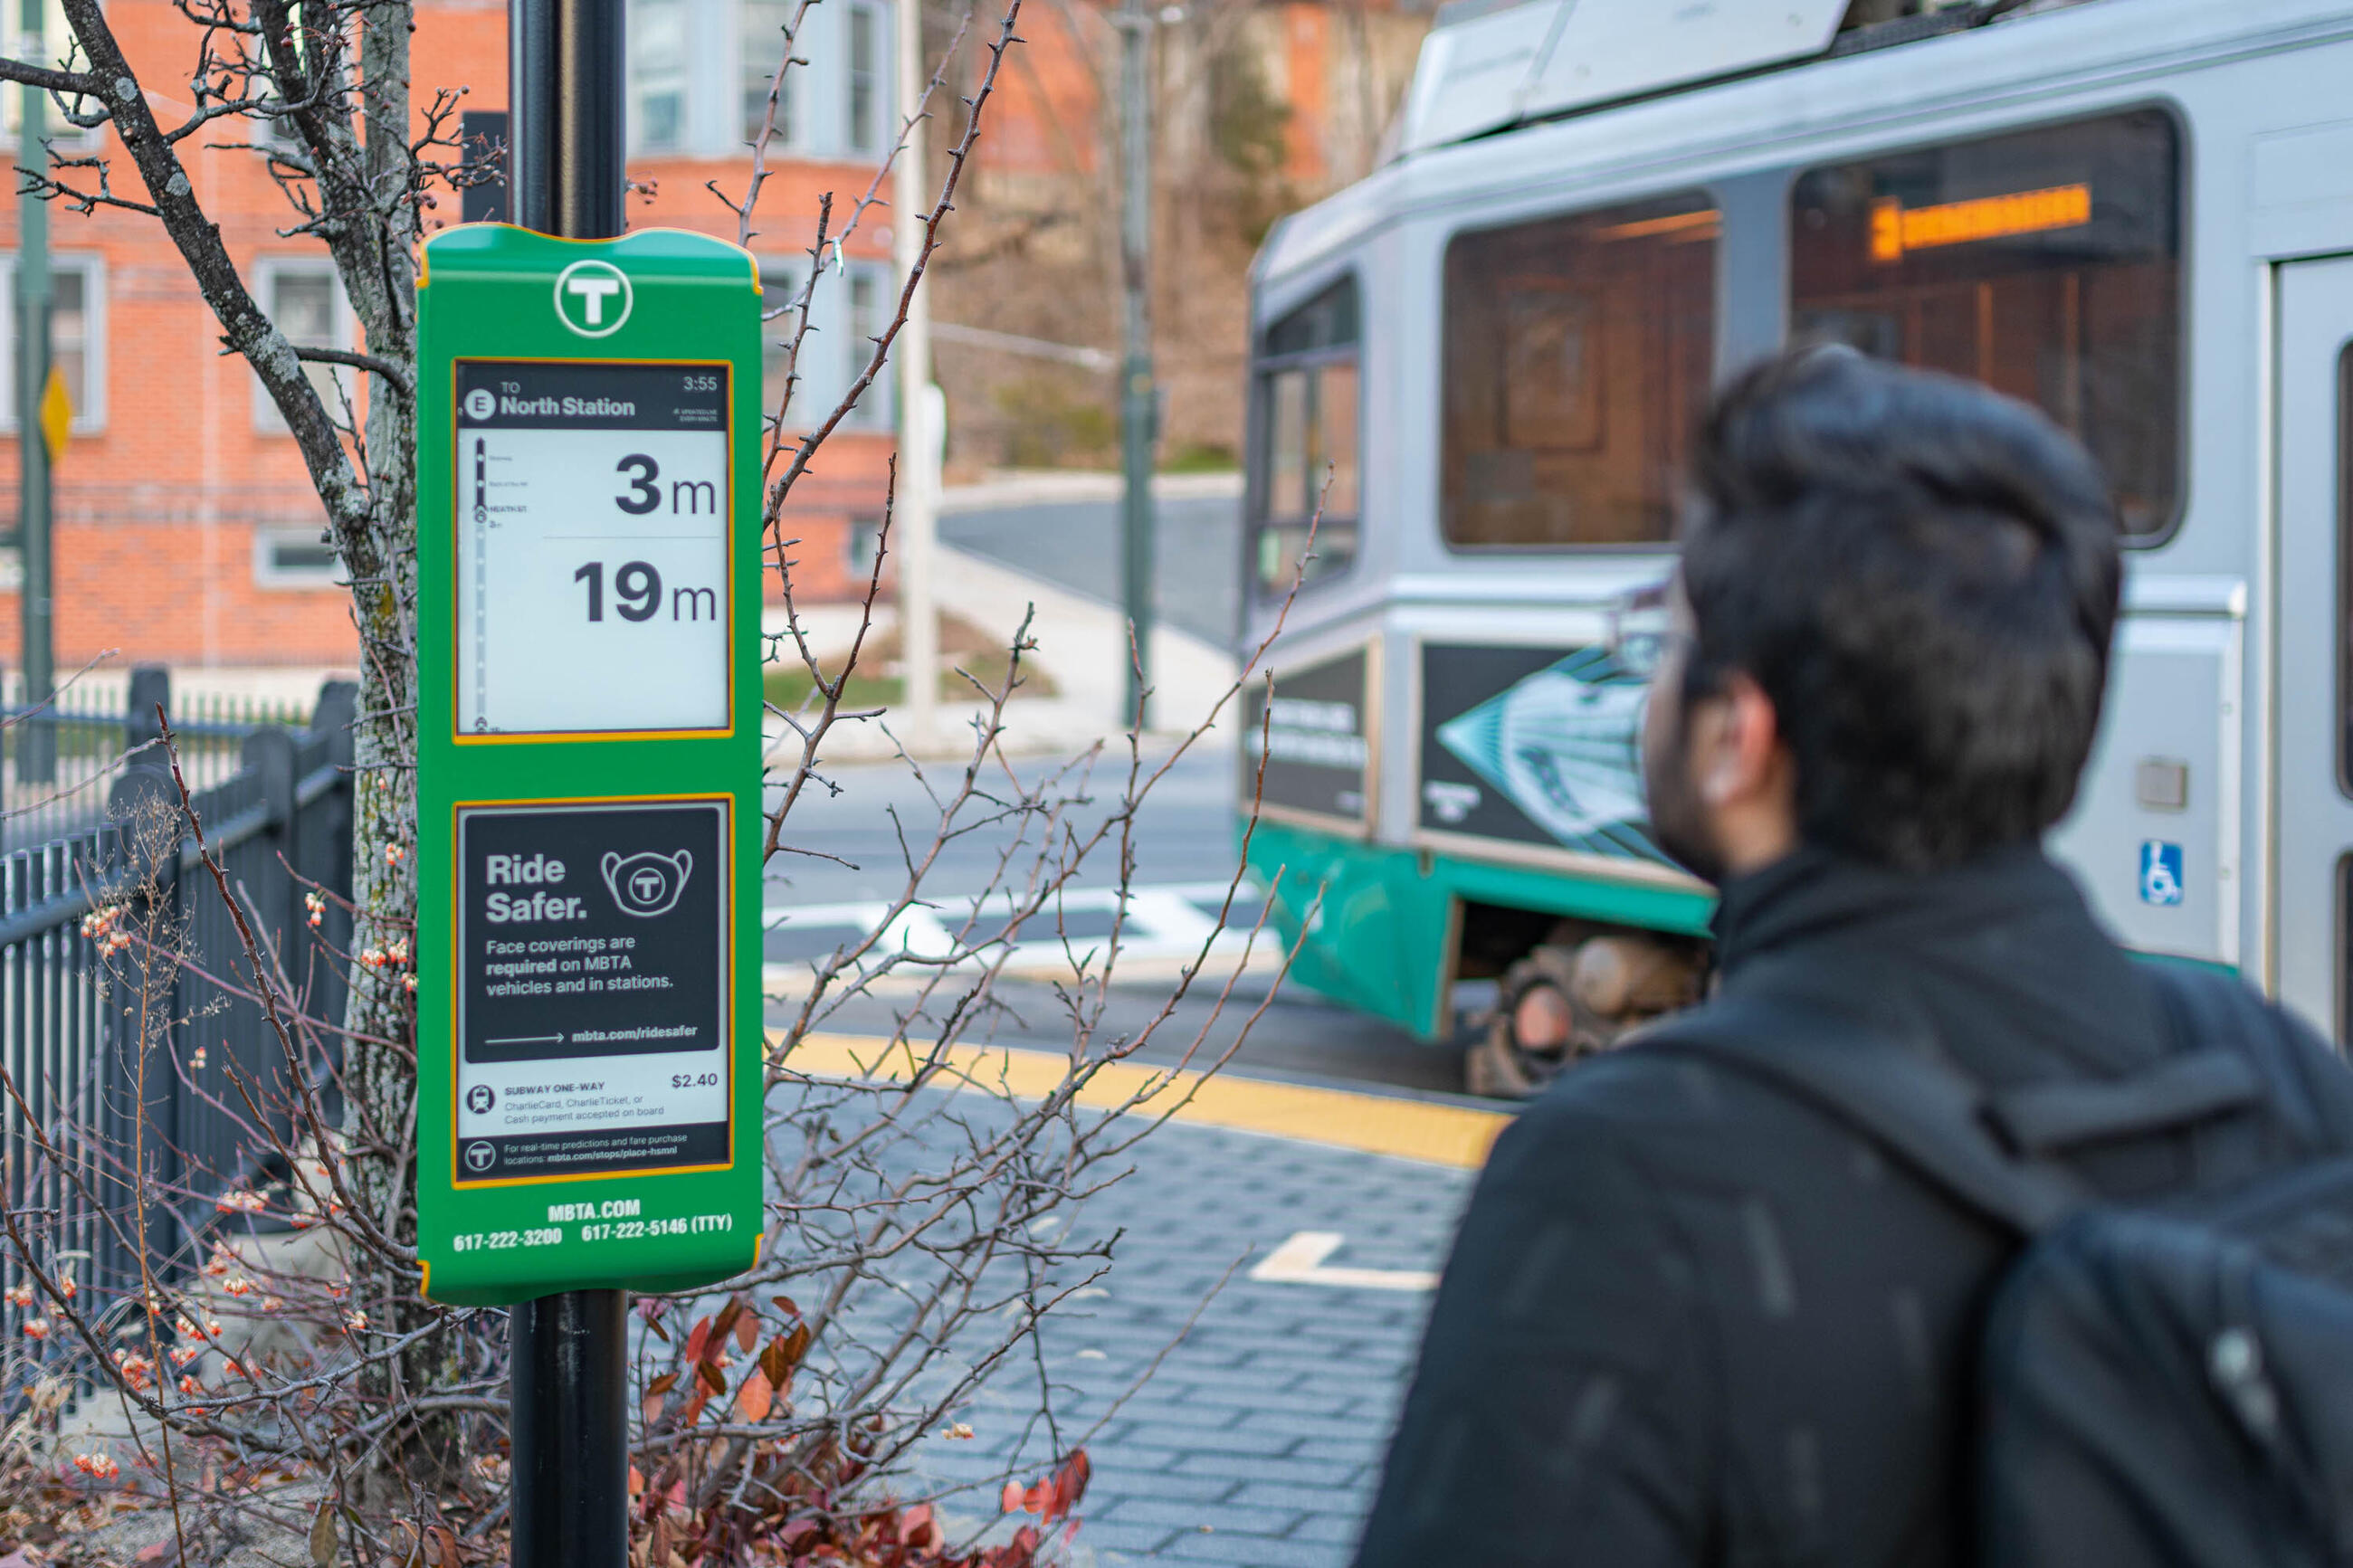 A rider reads an electronic ink (E Ink) digital sign near North Station. A Green Line trolley passes behind the rider aboveground. 